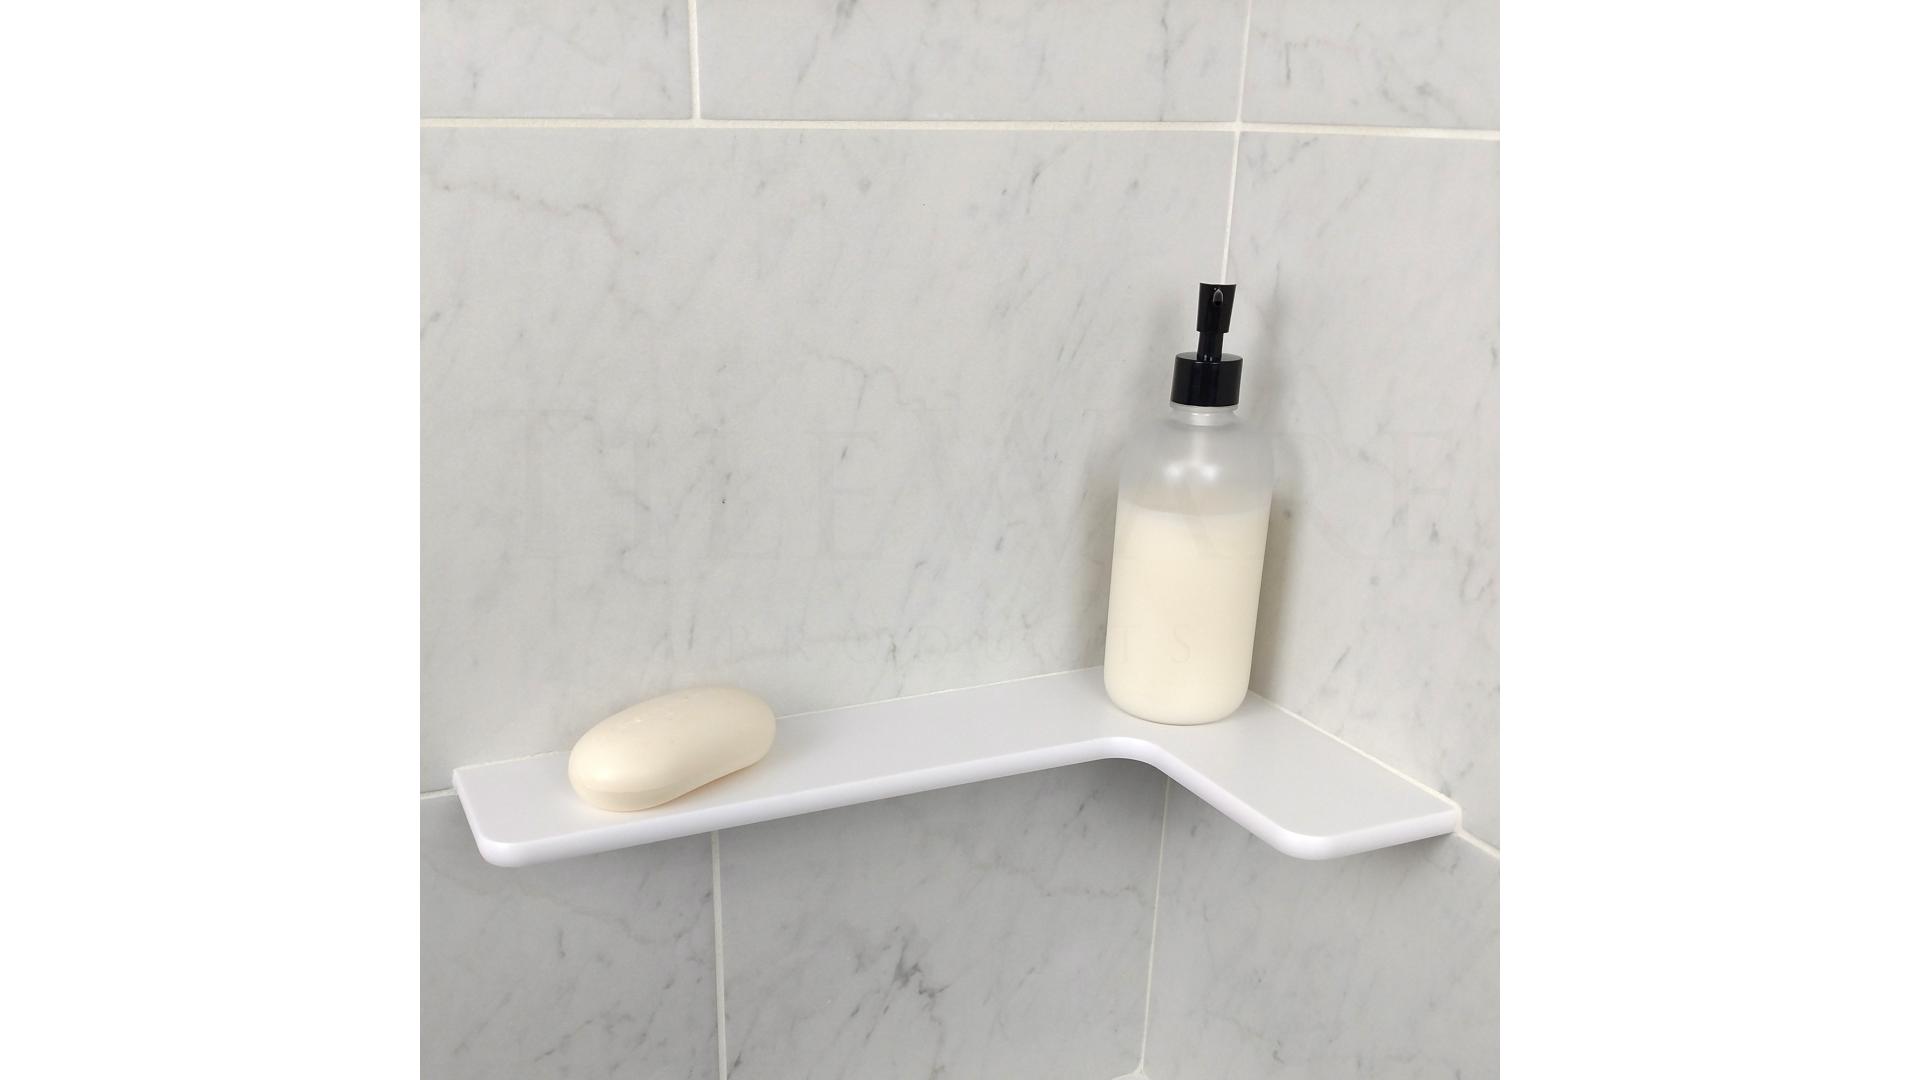 http://www.tilewareproducts.com/sites/default/files/styles/product_category_home_page/public/product-images/installationkit/img20190517133718334cropped2000x2000.jpg?itok=hISTO0mP